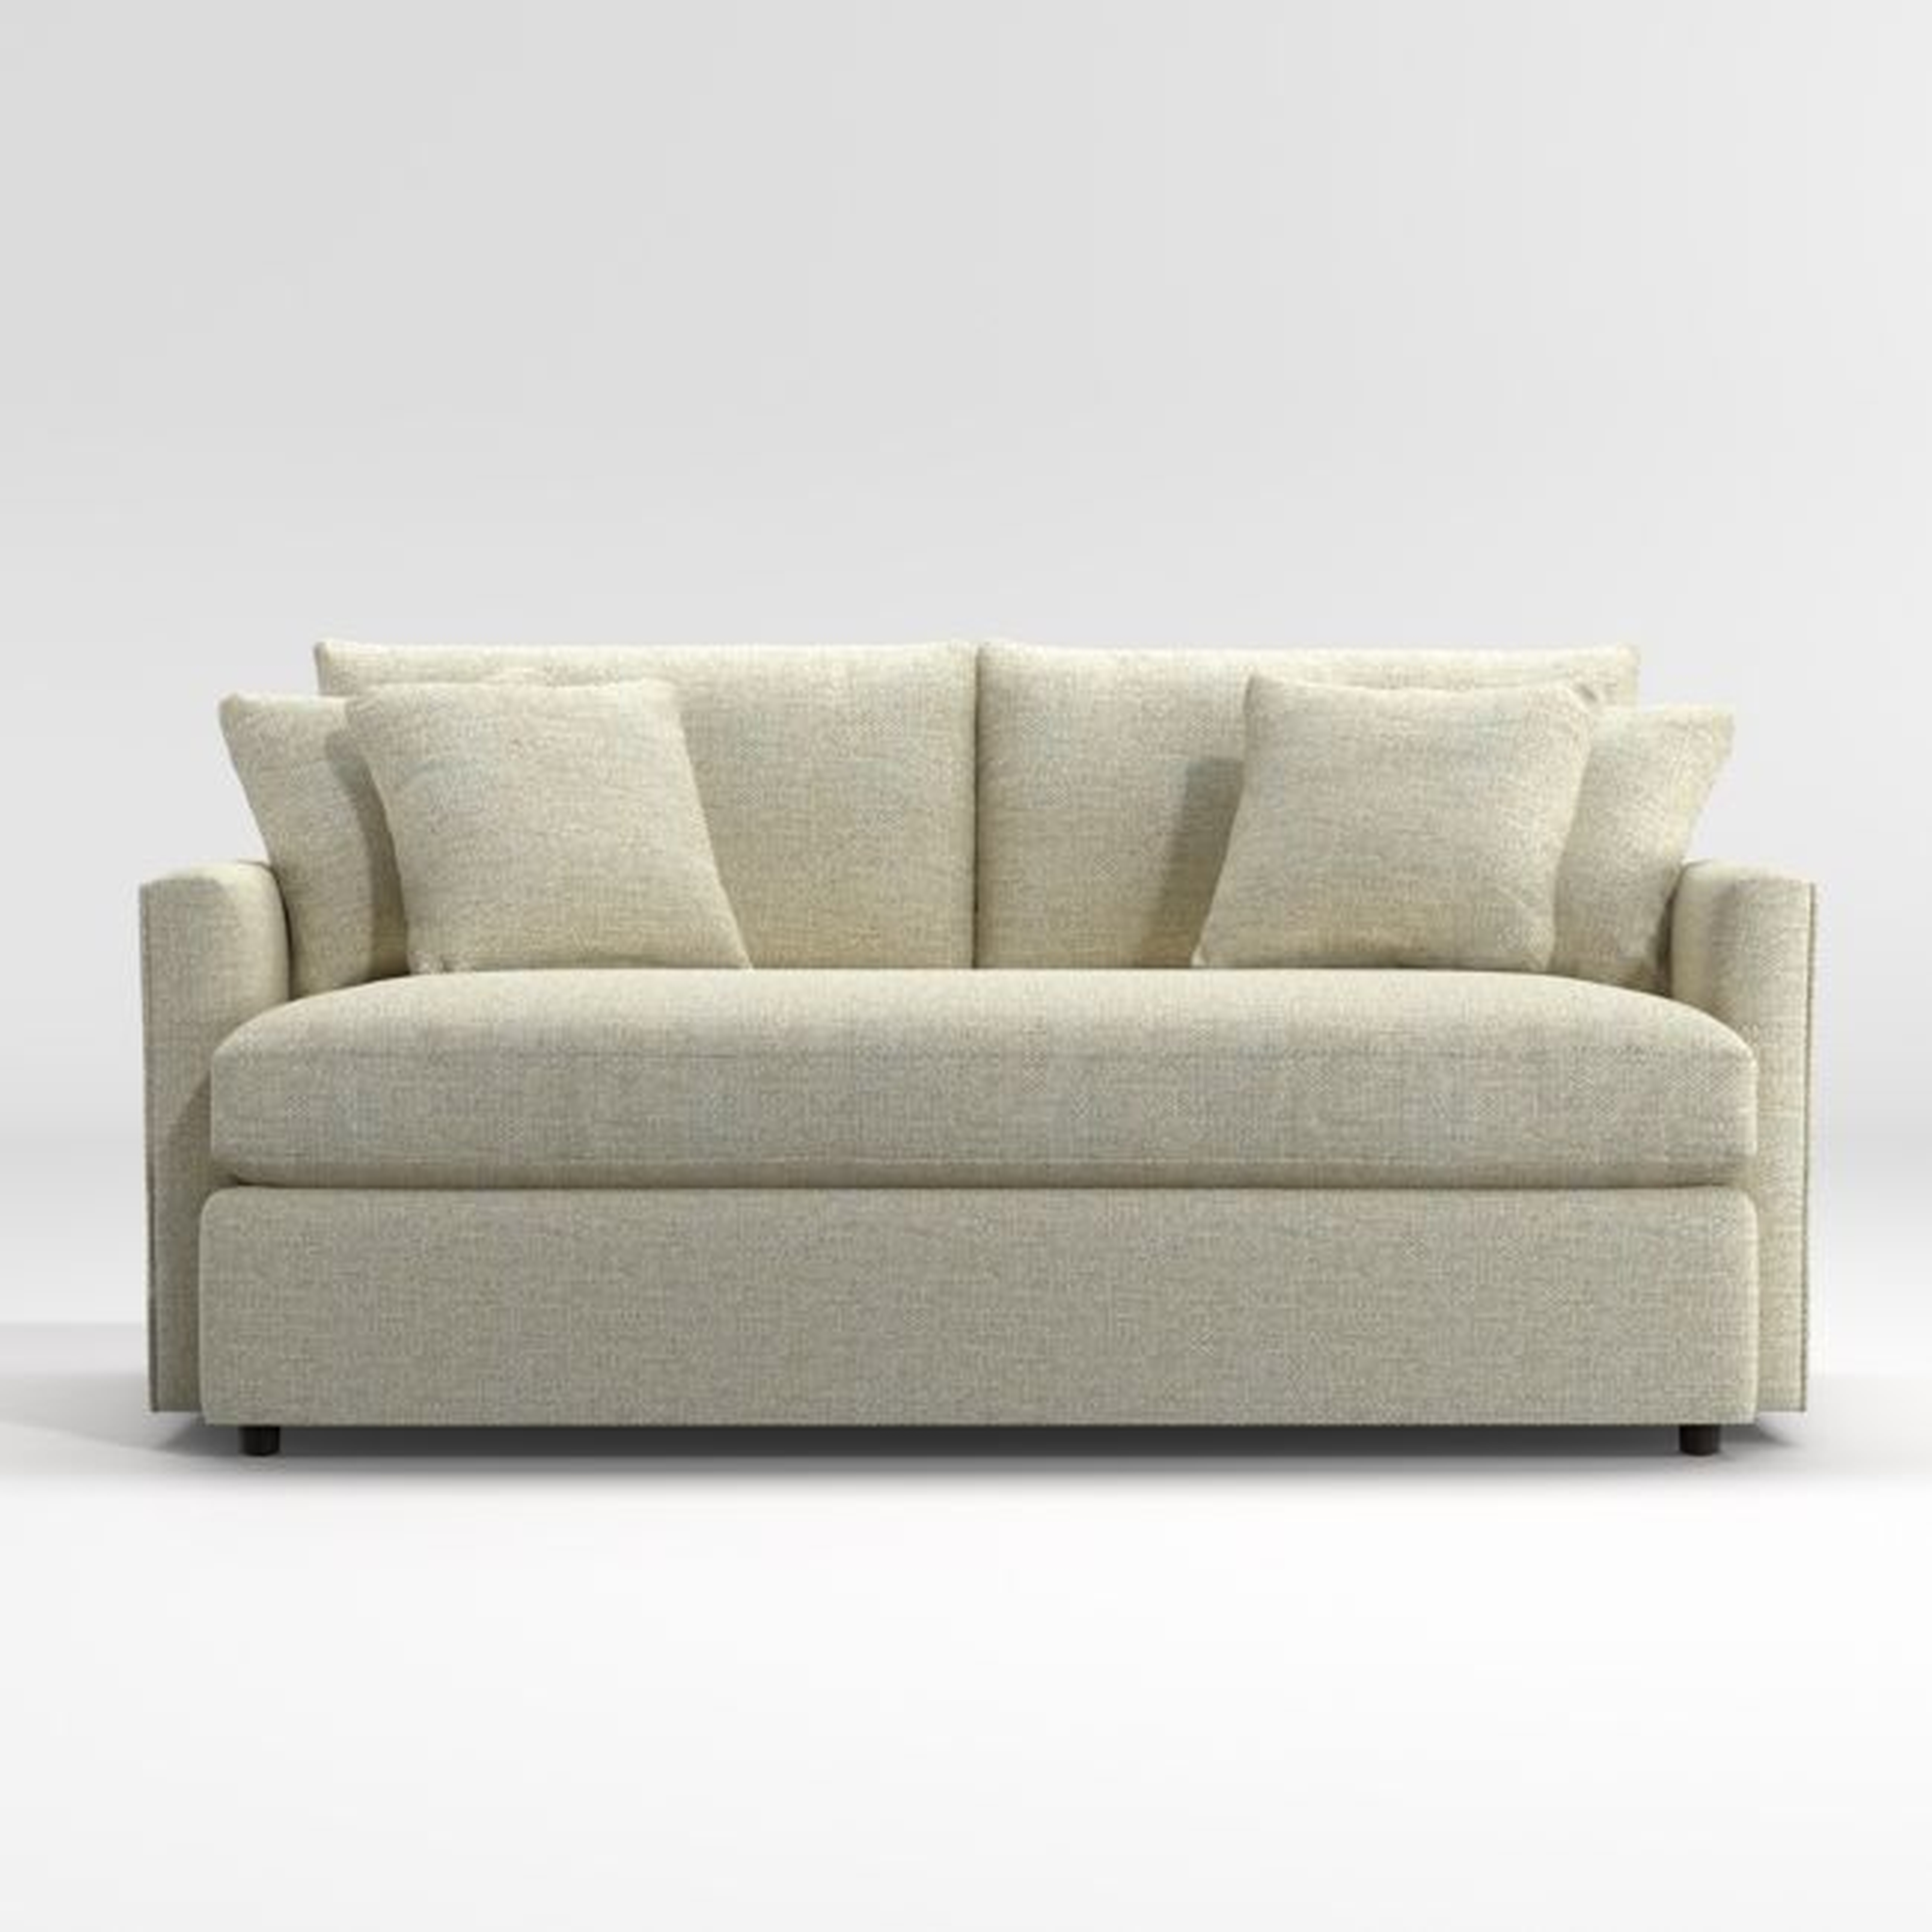 Lounge Apartment Bench Sofa - Crate and Barrel